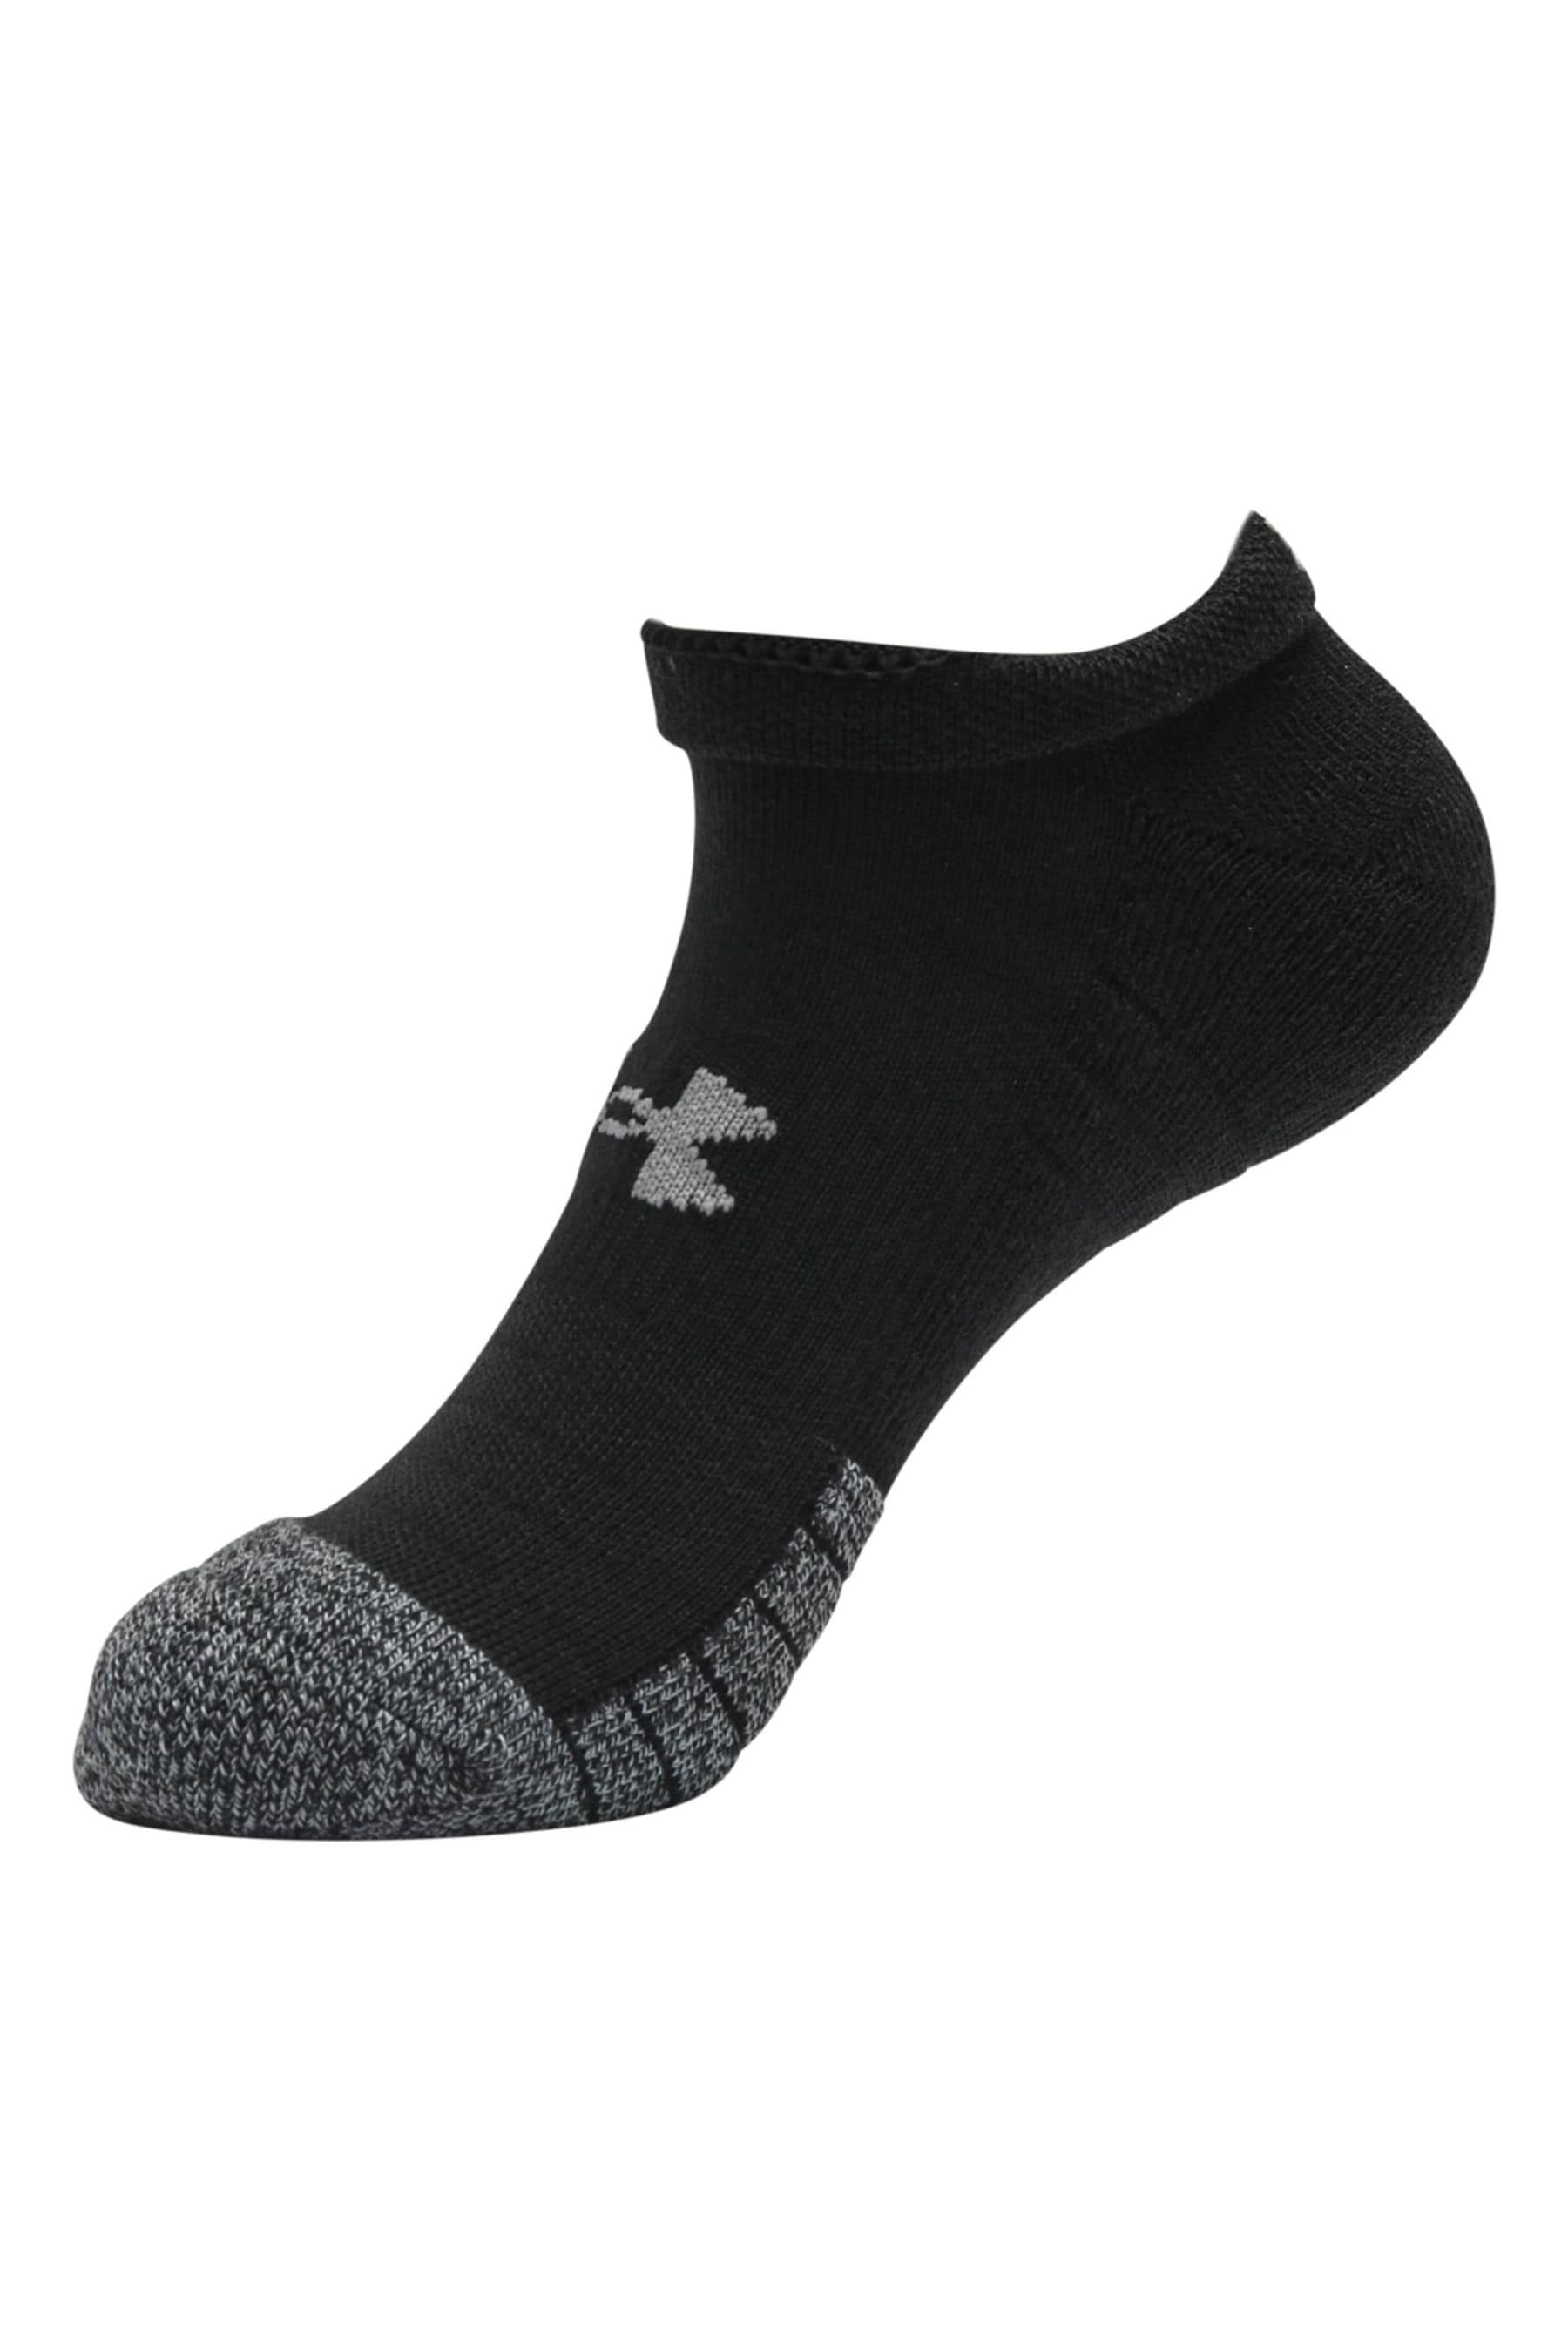 Buy Under Armour No Show Socks Three Pack from the Next UK online shop